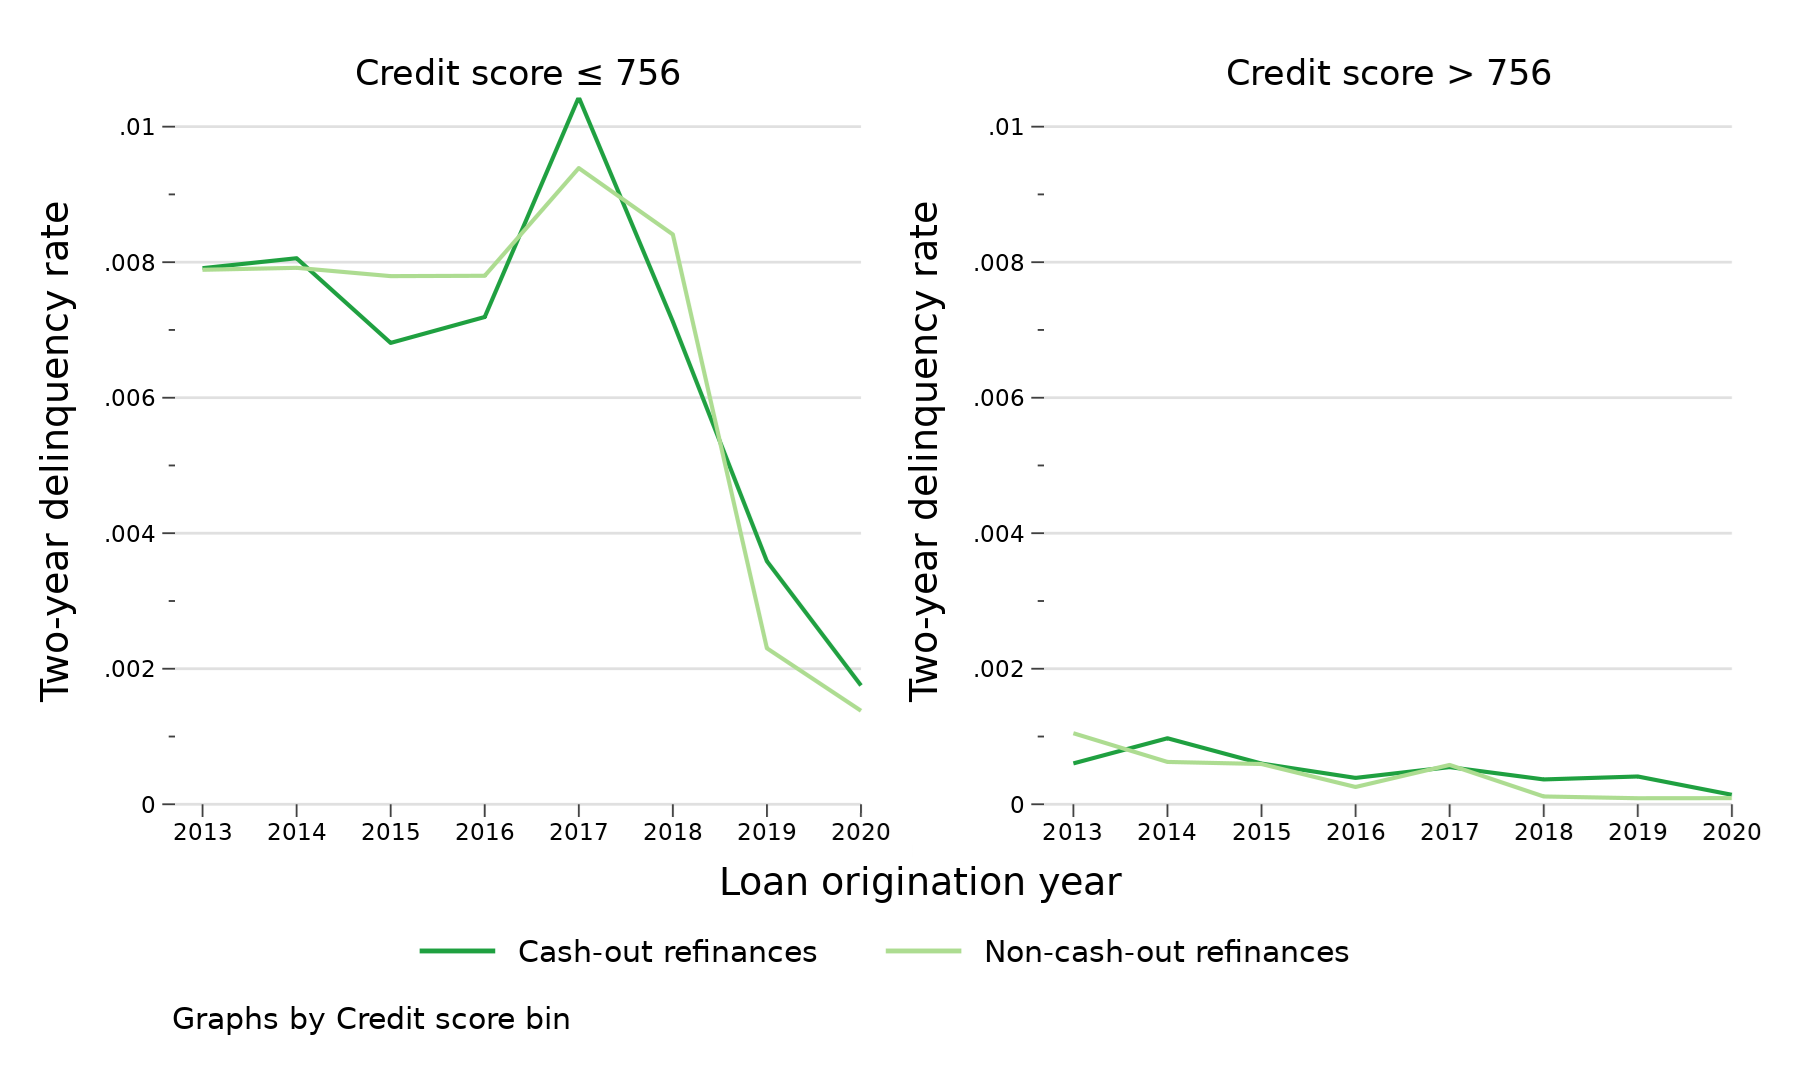 Line graph with two panels showing rates of serious delinquency (60 or more days past due, as well as bankruptcy and foreclosure) two years after origination for cash-out refinance borrowers and non-cash-out refinance mortgages, by year, from 2013 to 2020. The left panel shows delinquency rates for borrowers with a credit score at or below 756 at origination, while the right panel shows delinquency rates for borrowers with a credit score above 756.